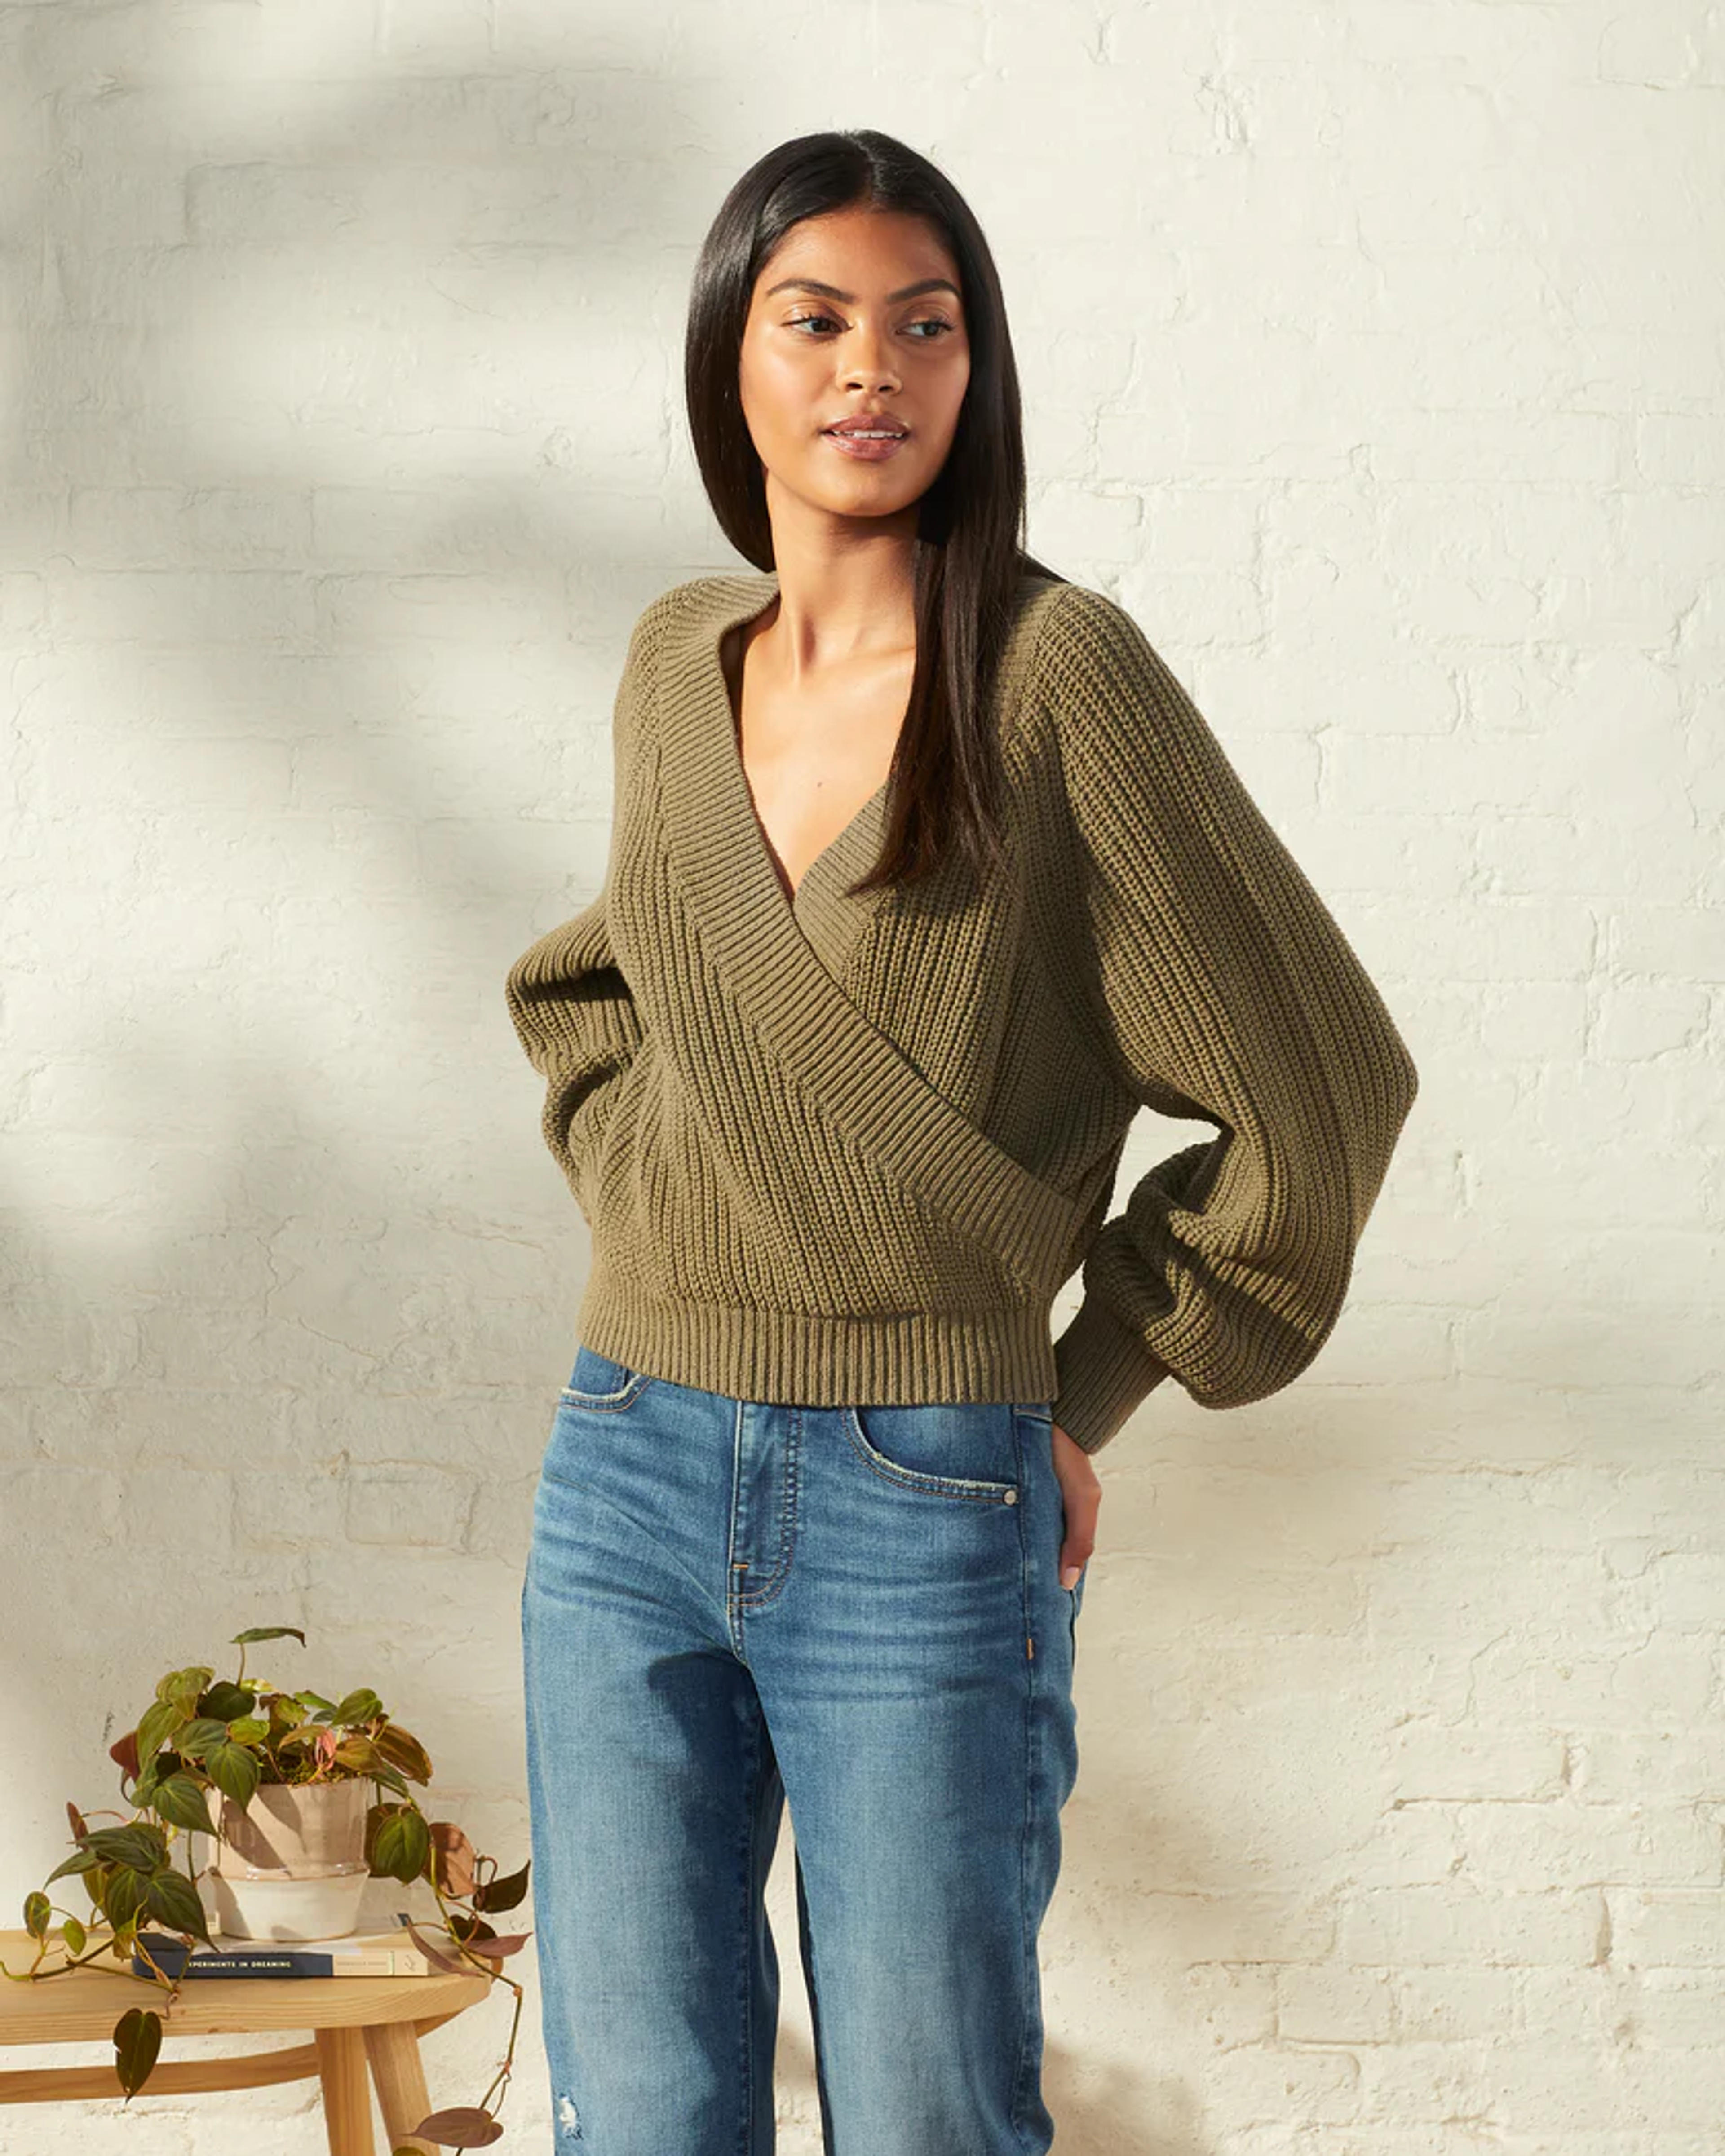 Women's Relaxed Fit Wrap-Style Sweater at UpWest